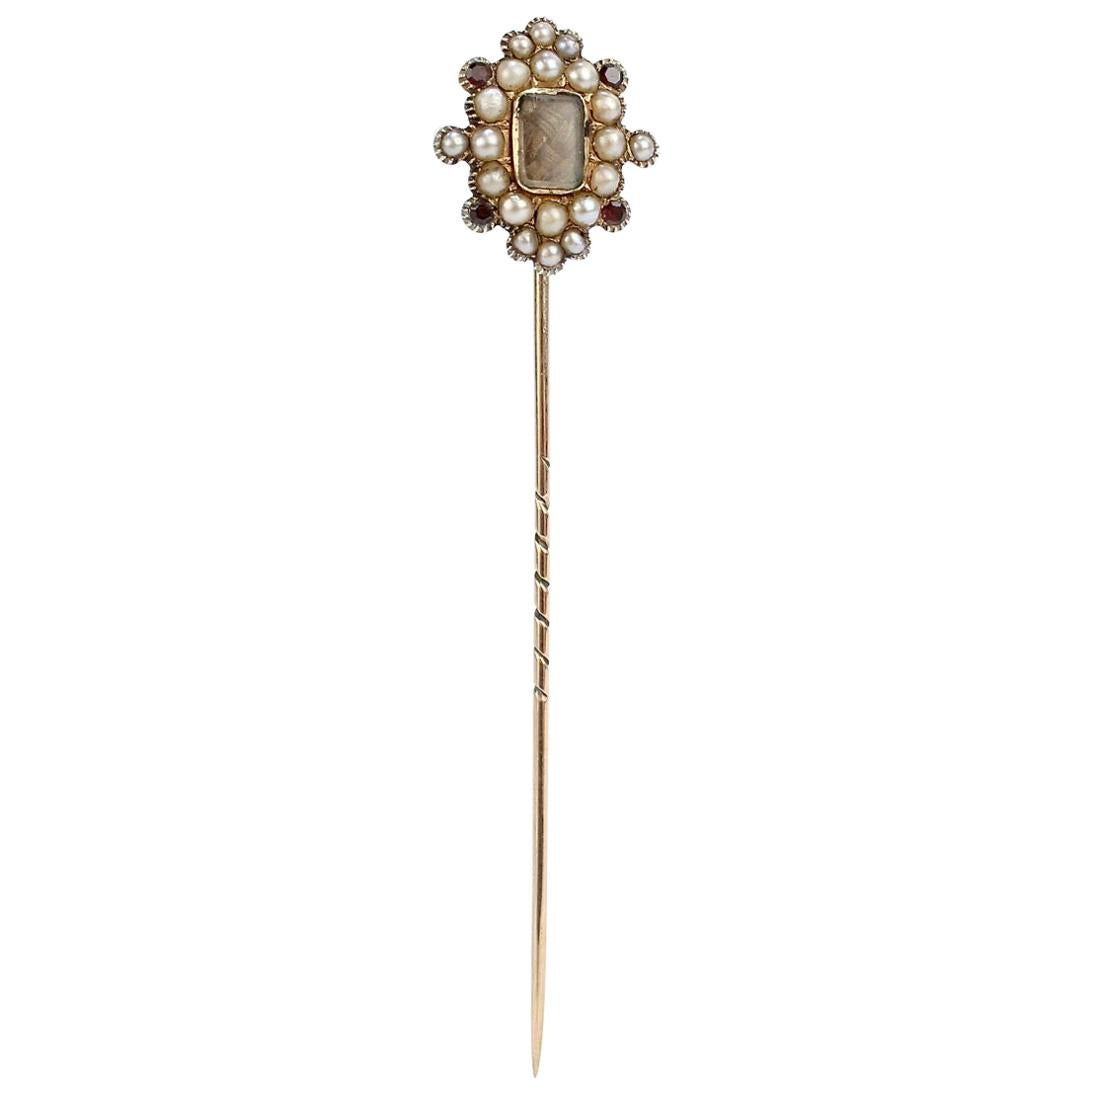 Antique Georgian Mourning Stick Pin with Gold, Pearls, and Garnets